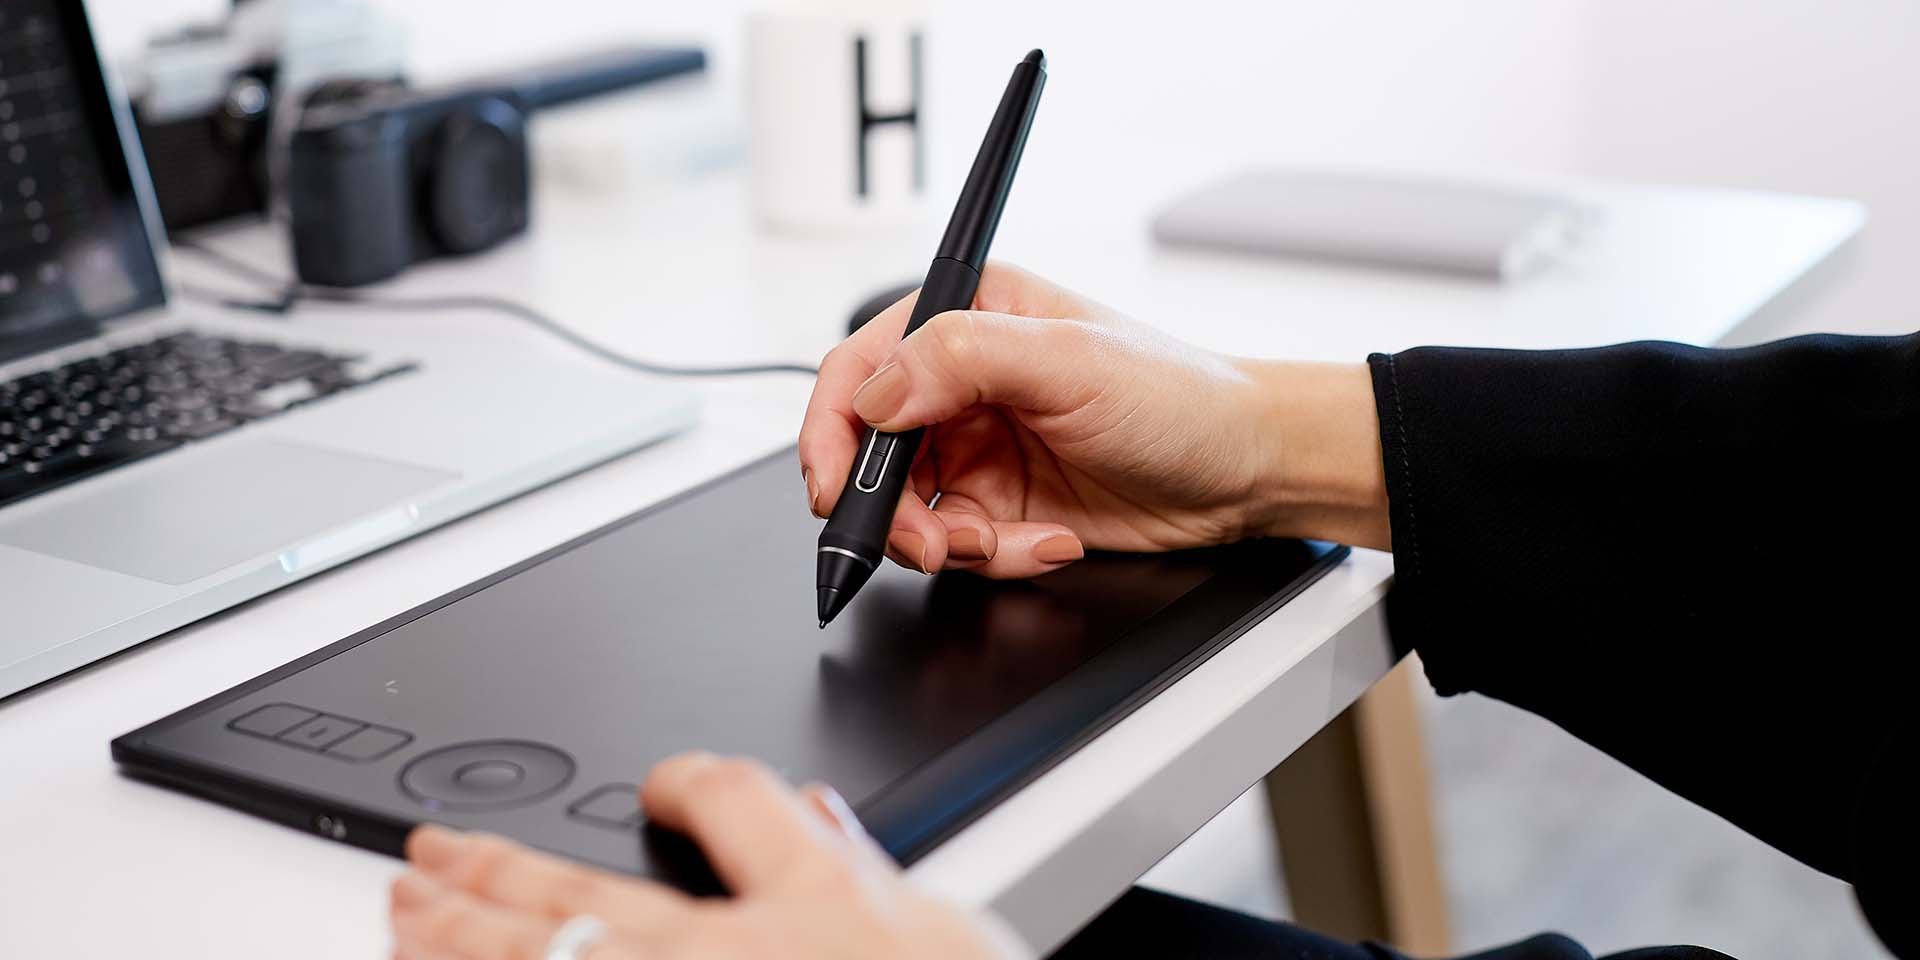 Intuos Pro Pen in use